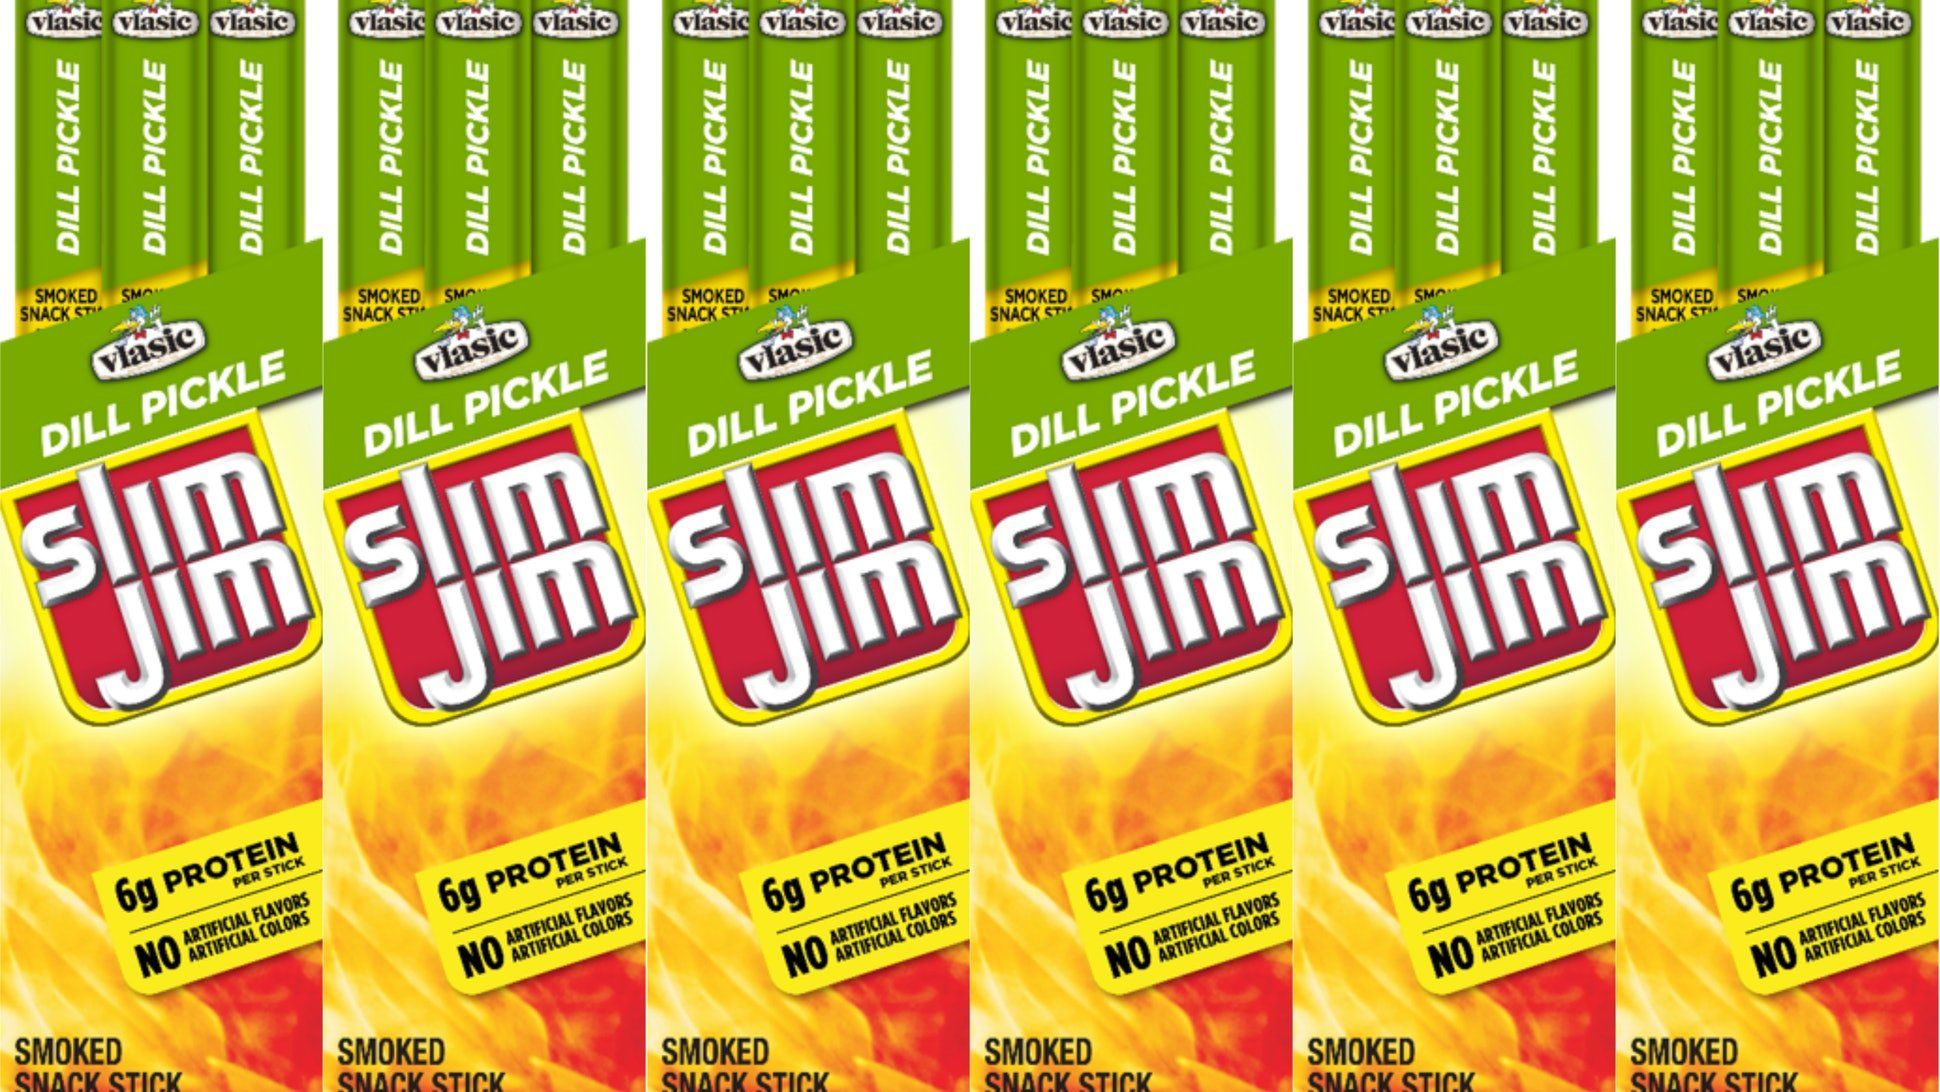 Dill Pickle Slim Jims Are A Thing Now — Thanks, Vlasic